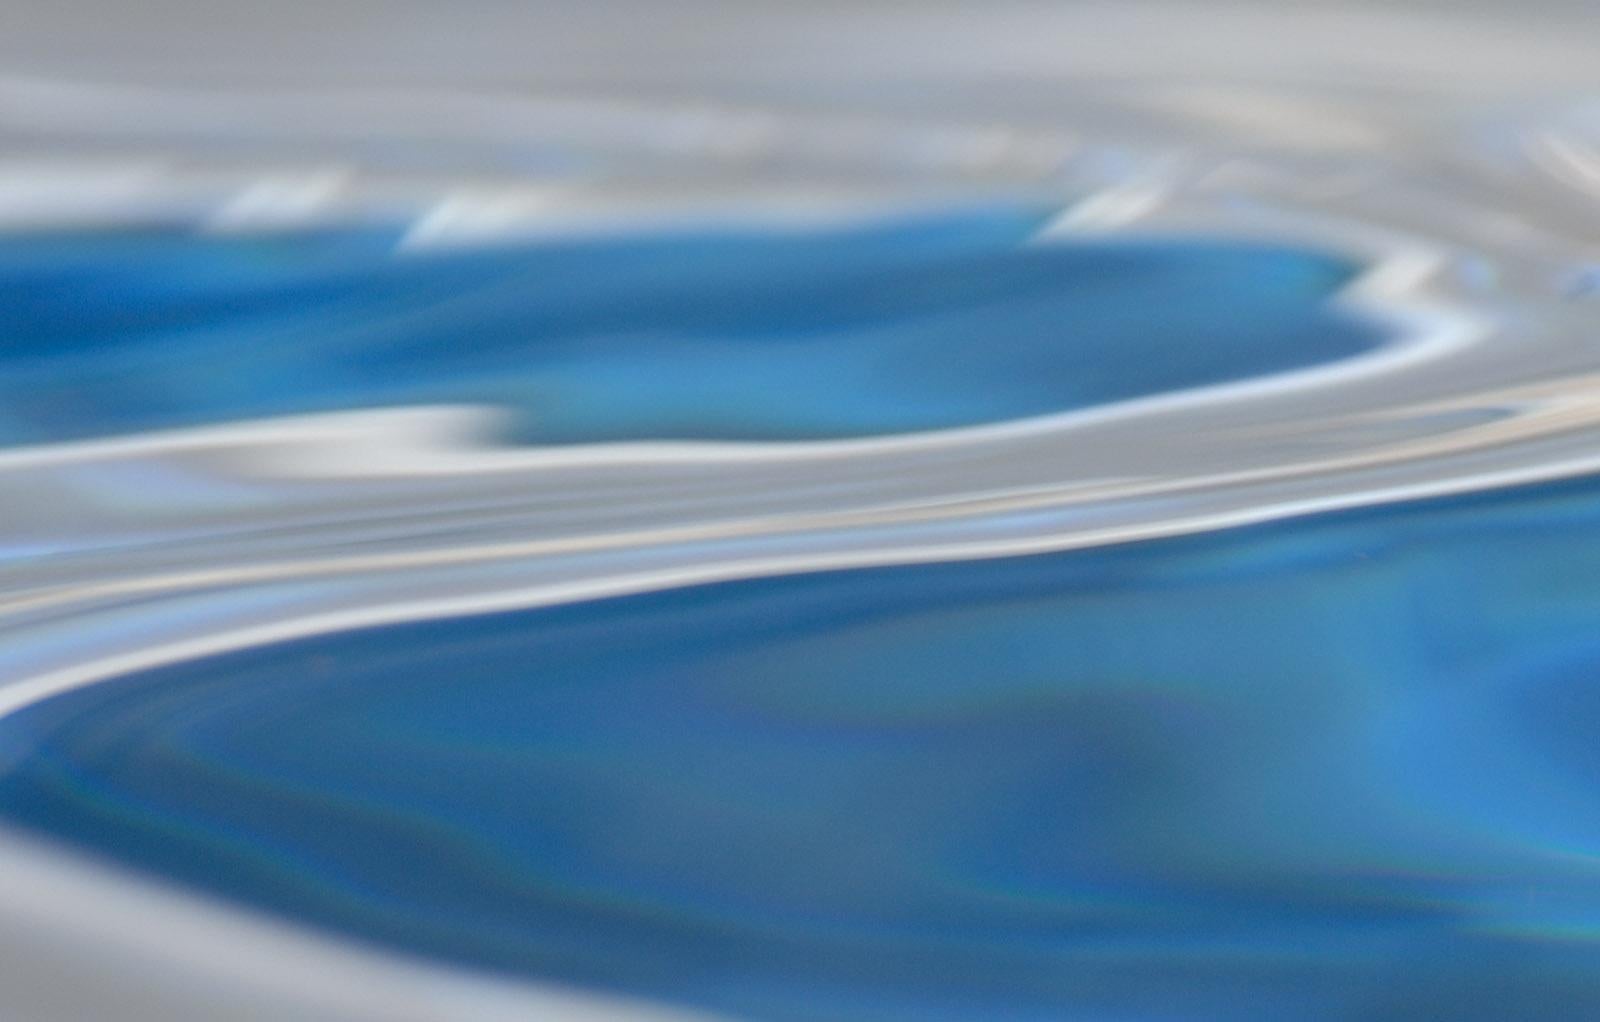 Water element 1 - Signed limited edition abstract pigment print, Blue nature - Photograph by Michael Banks